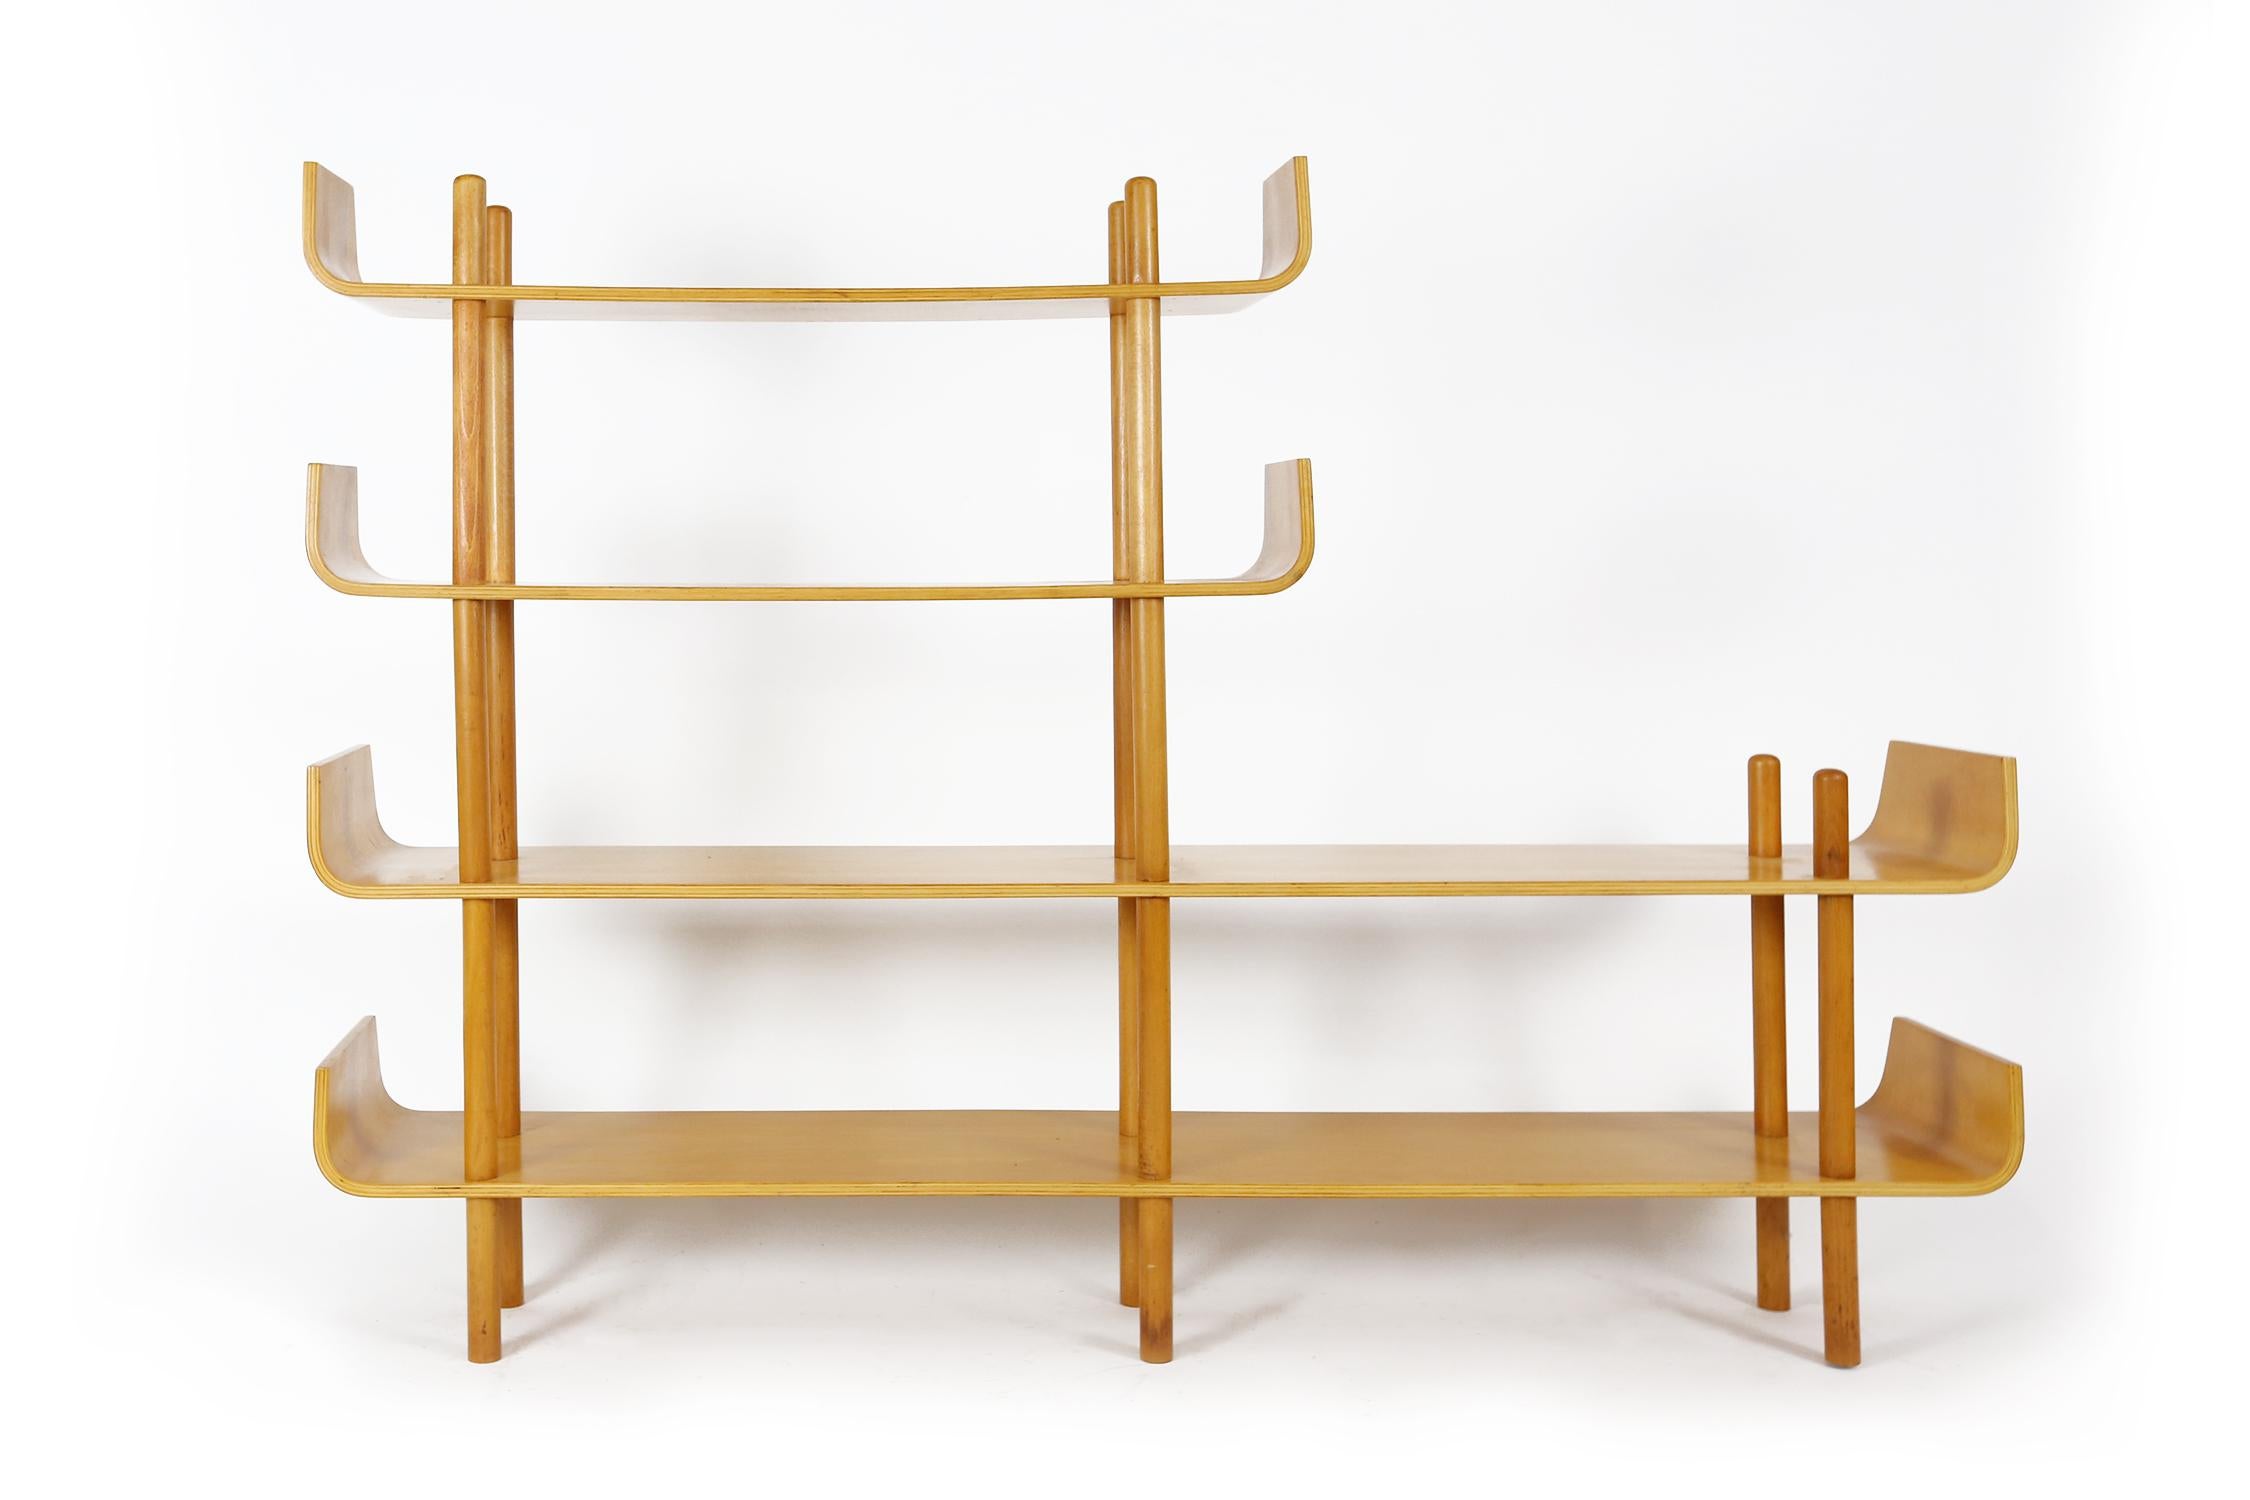 Bentwood shelving unit designed by Willem Lutjens for Gouda den Boer model number 545, from 1953. Wooden plywood beech shelving with beech sticks.
This nice light wood is easy to combine with other warm furniture from all over the globe. The nice